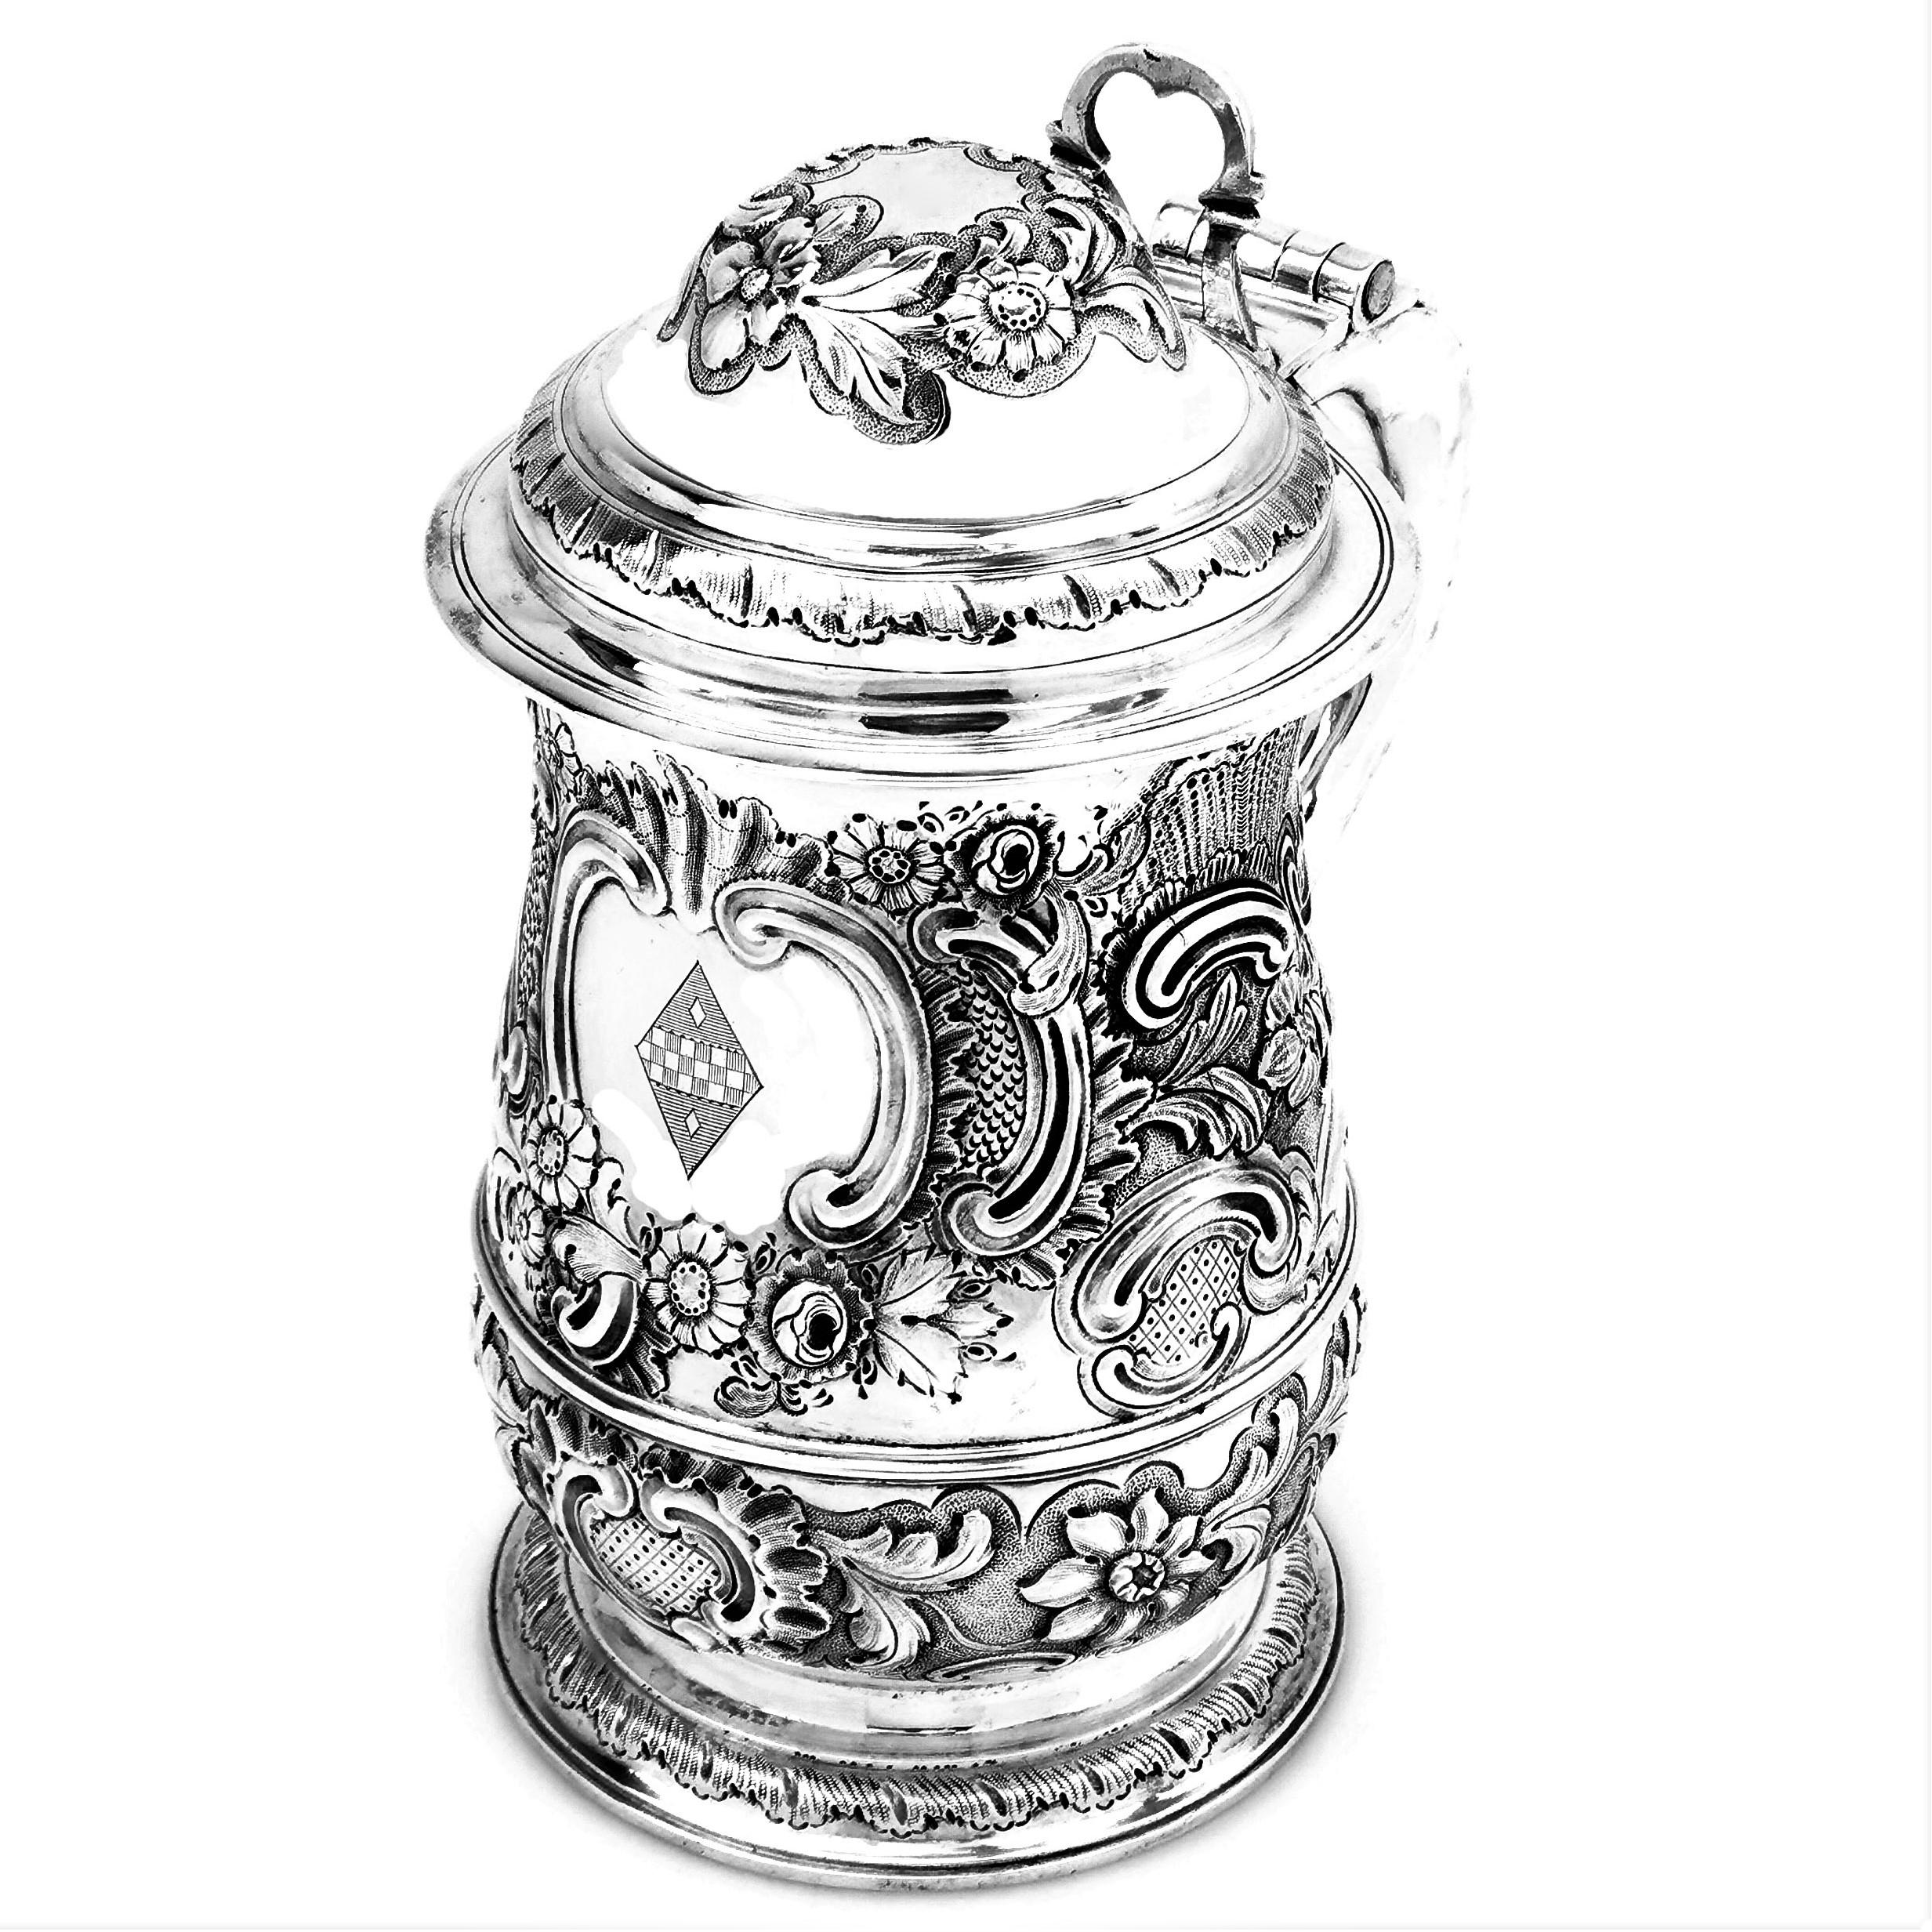 An impressive antique George III sterling silver Lidded Tankard embellished with an ornate chased design on the body, domed lid and spread foot. The body of the Tankard has an elegant floral and scroll design around a shaped cartouche with an